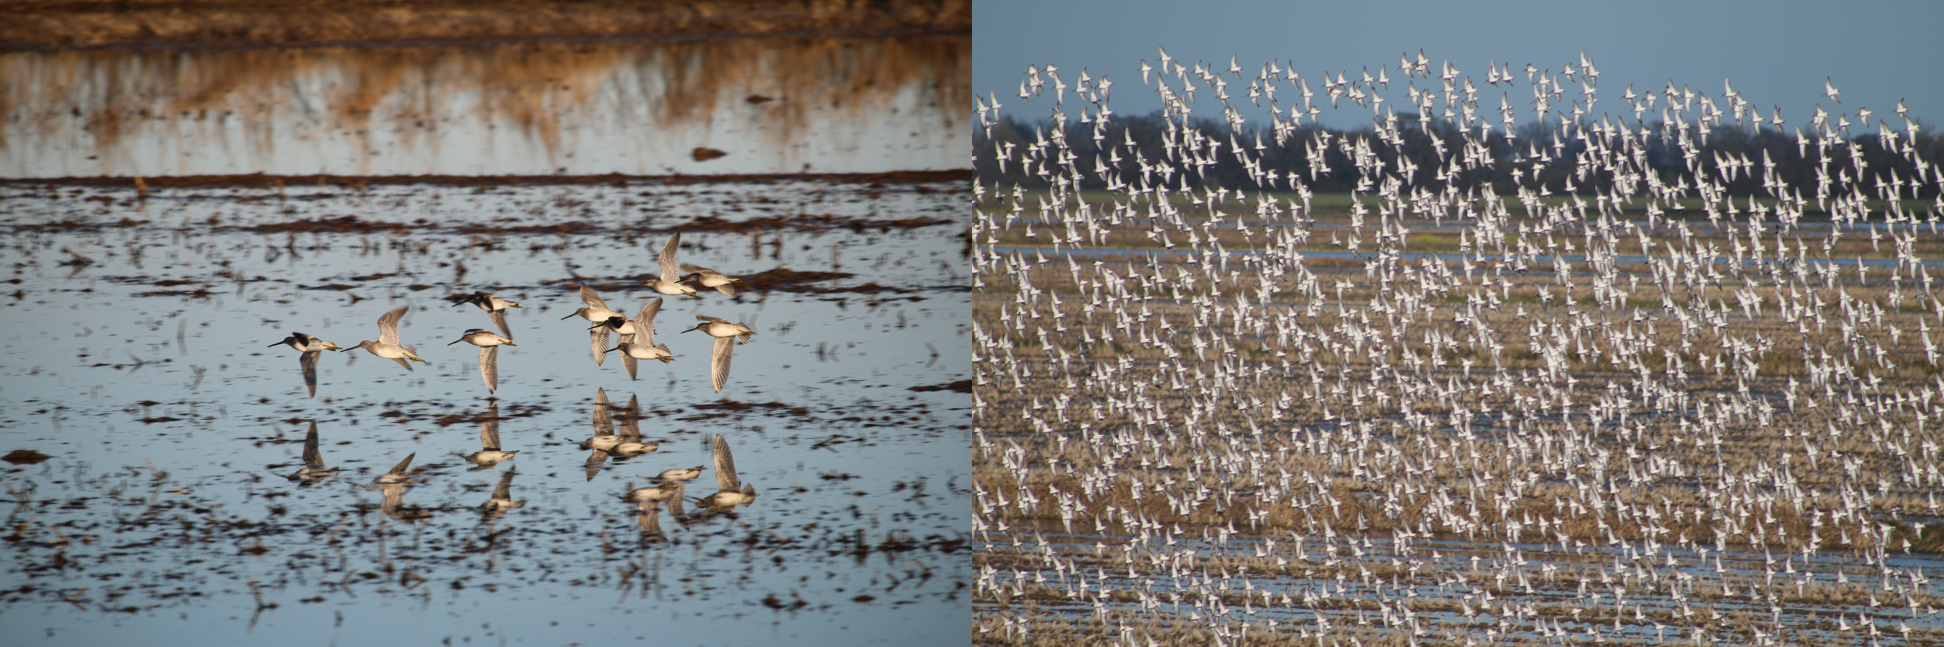 Two images side by side, showing large flocks of migratory birds resting on the surface of a lake